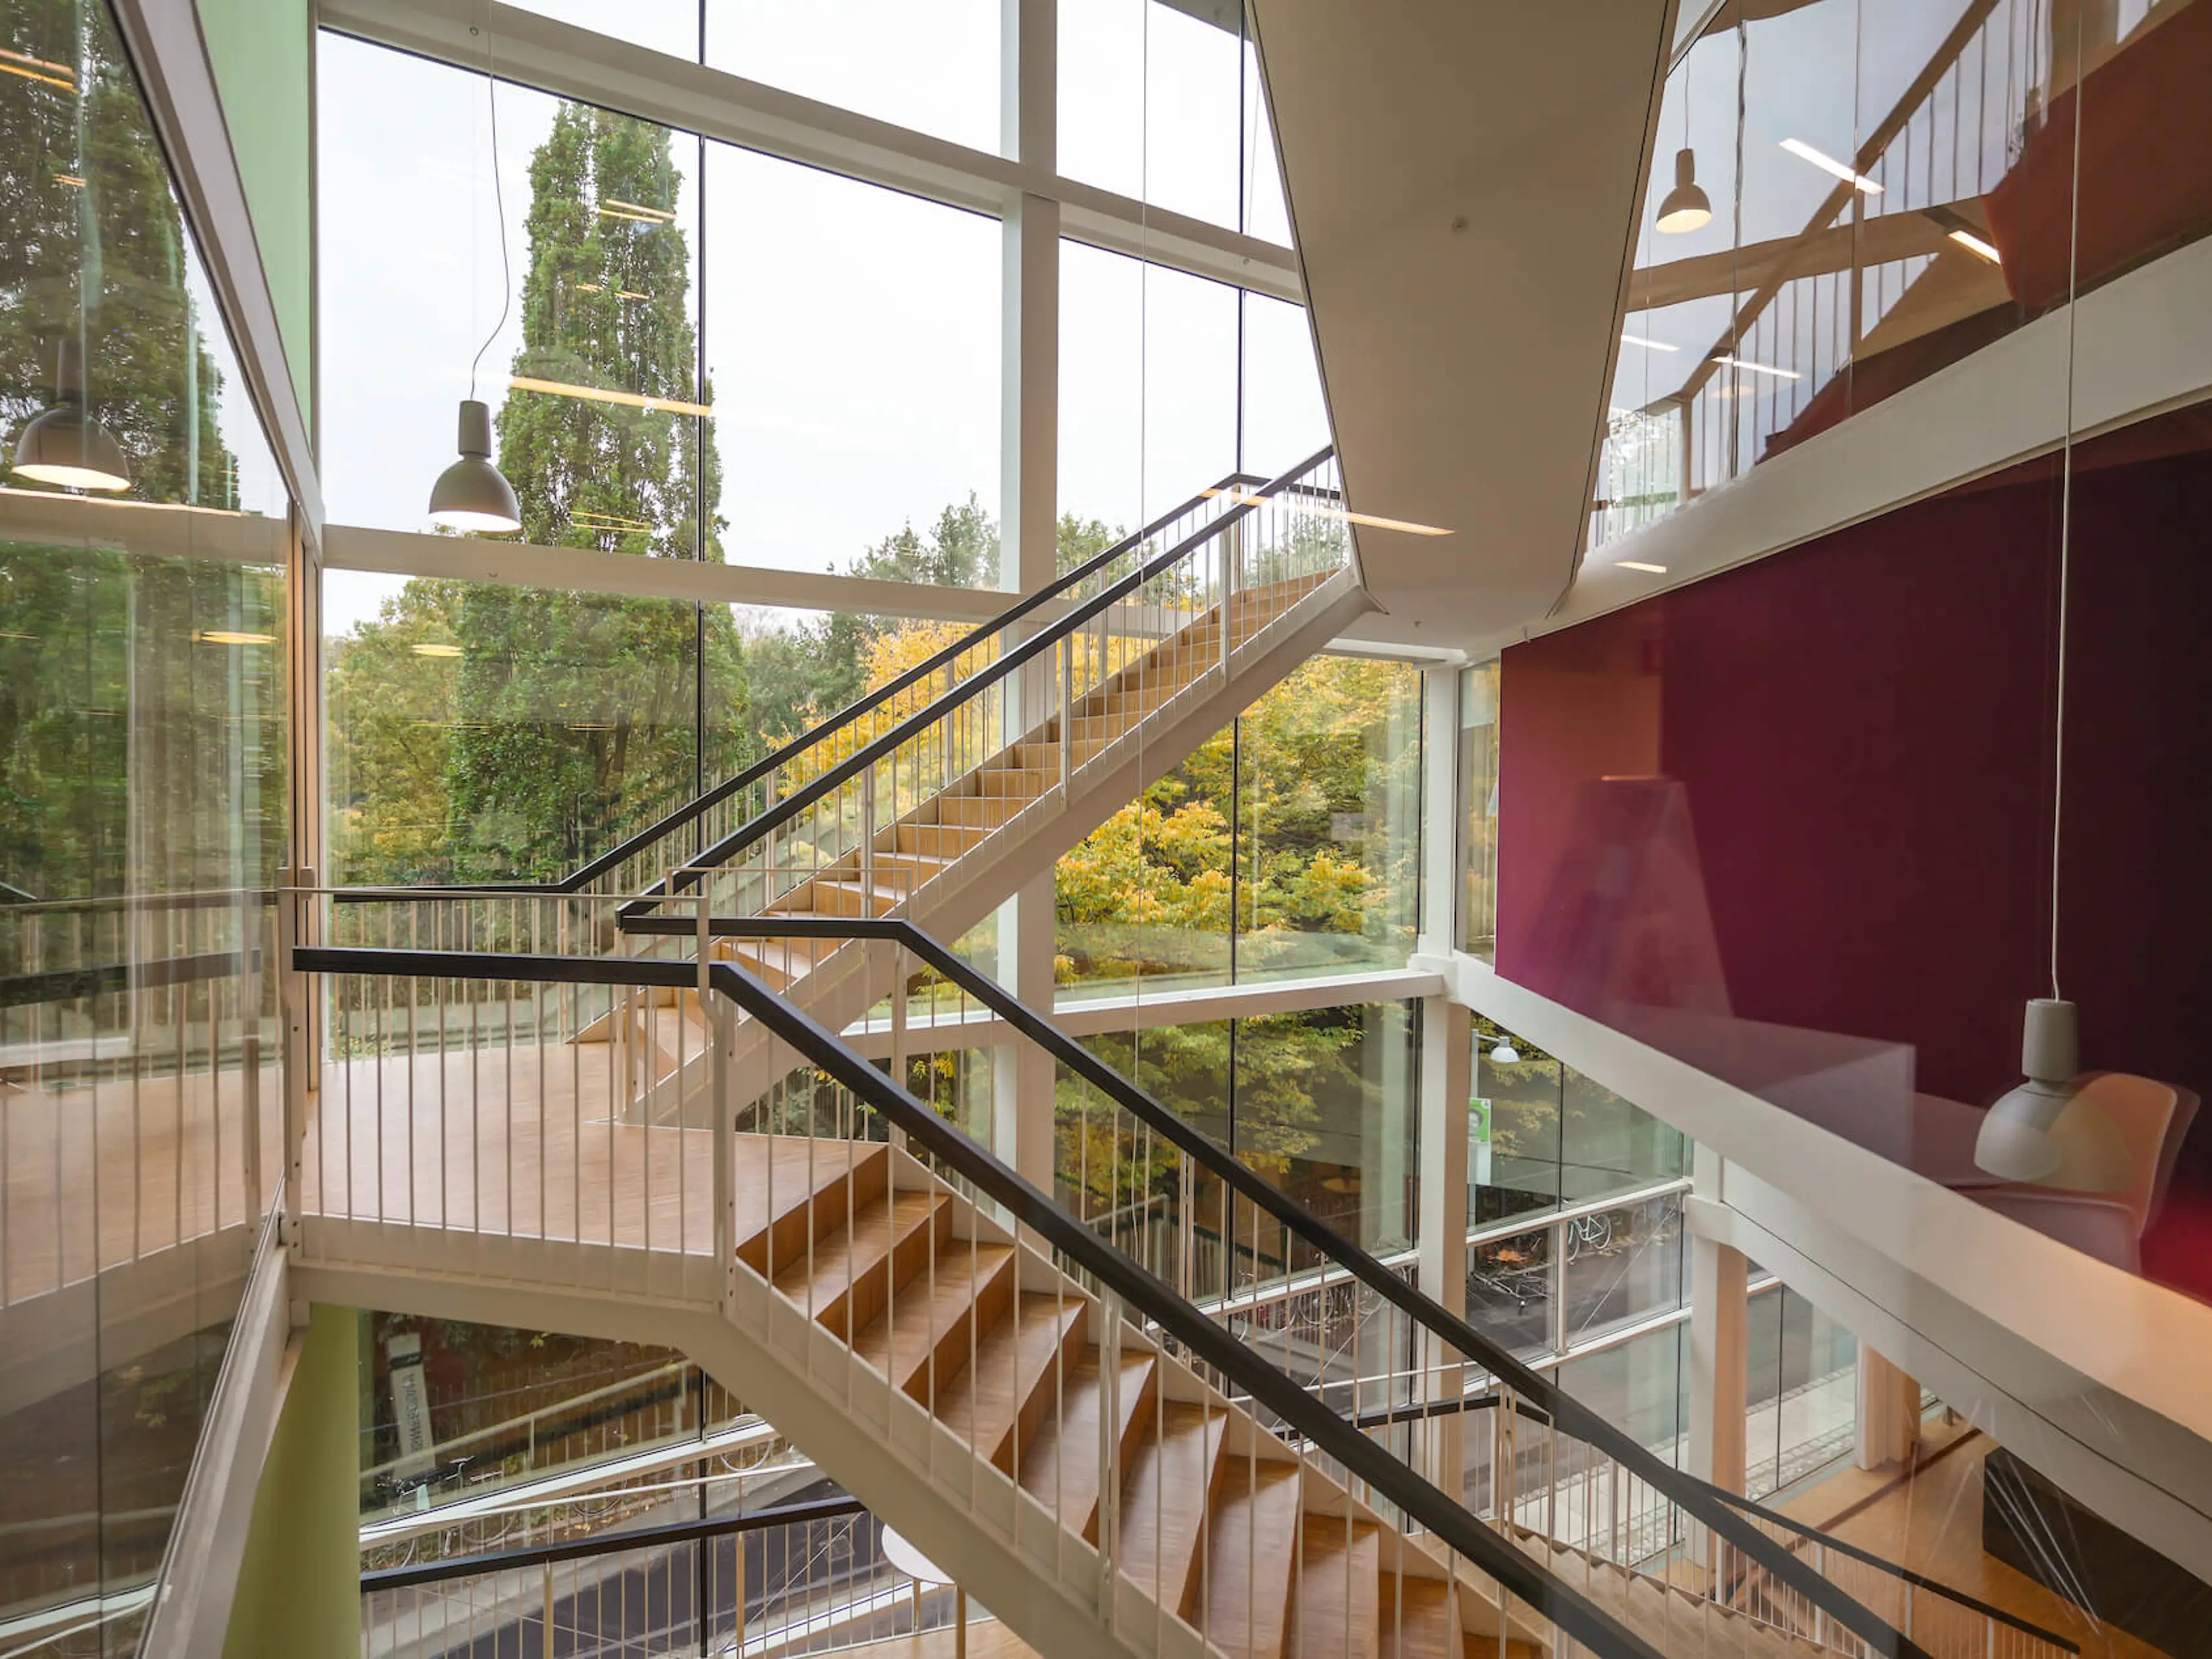 Picture of the staircase in the MBA building